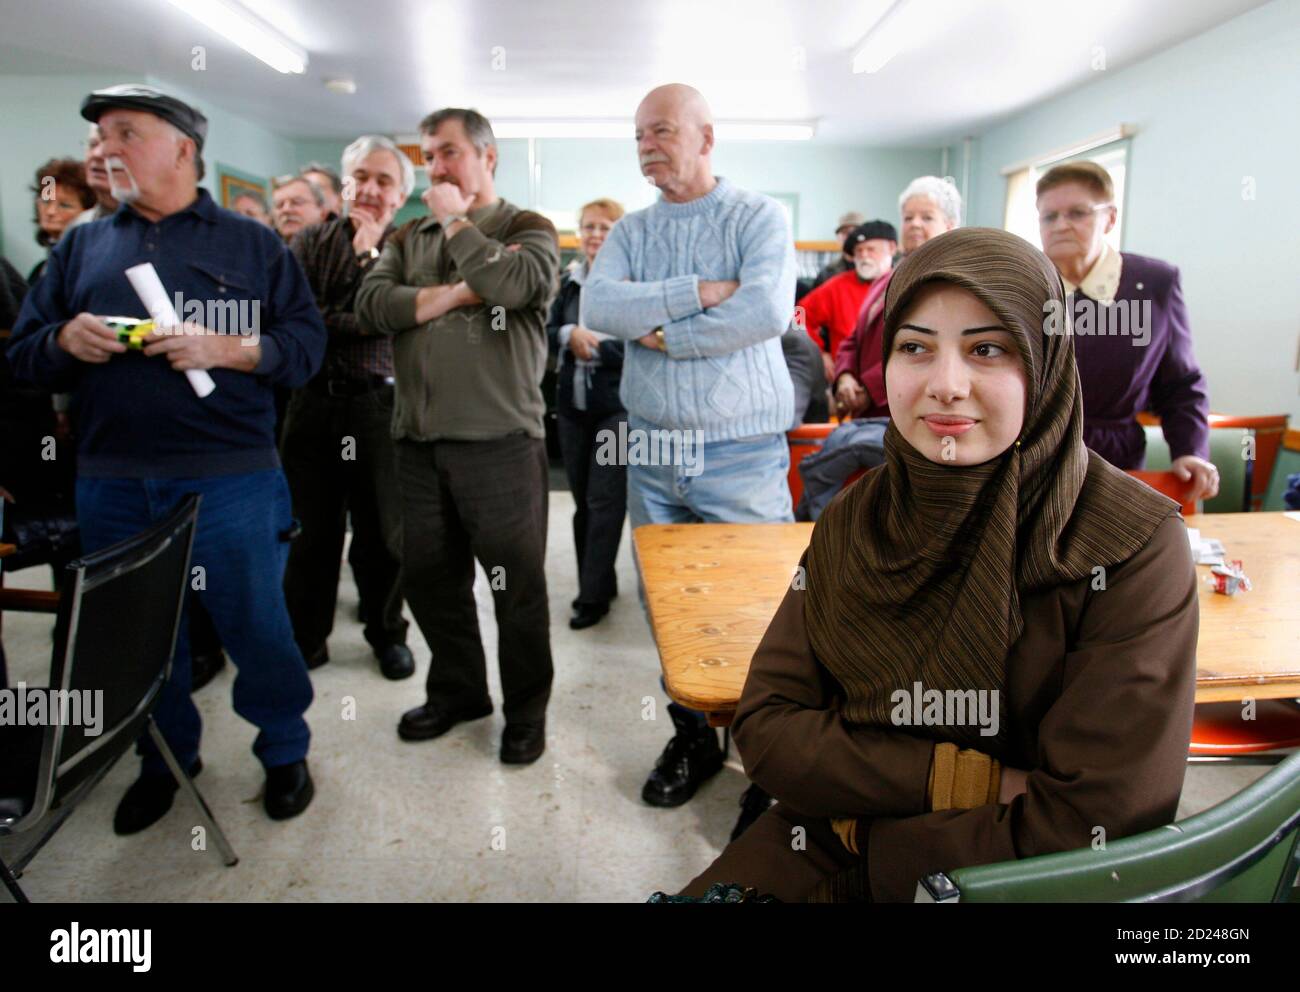 Hiba Nazar (R) sits as she and a group of Muslim women meet residents of the Quebec town of Herouxville February 11, 2007. The Muslim group met with the residents to voice their objection to the town council's recently passed code of social norms that new immigrants would have to adhere to.   REUTERS/Shaun Best        (CANADA) Stock Photo